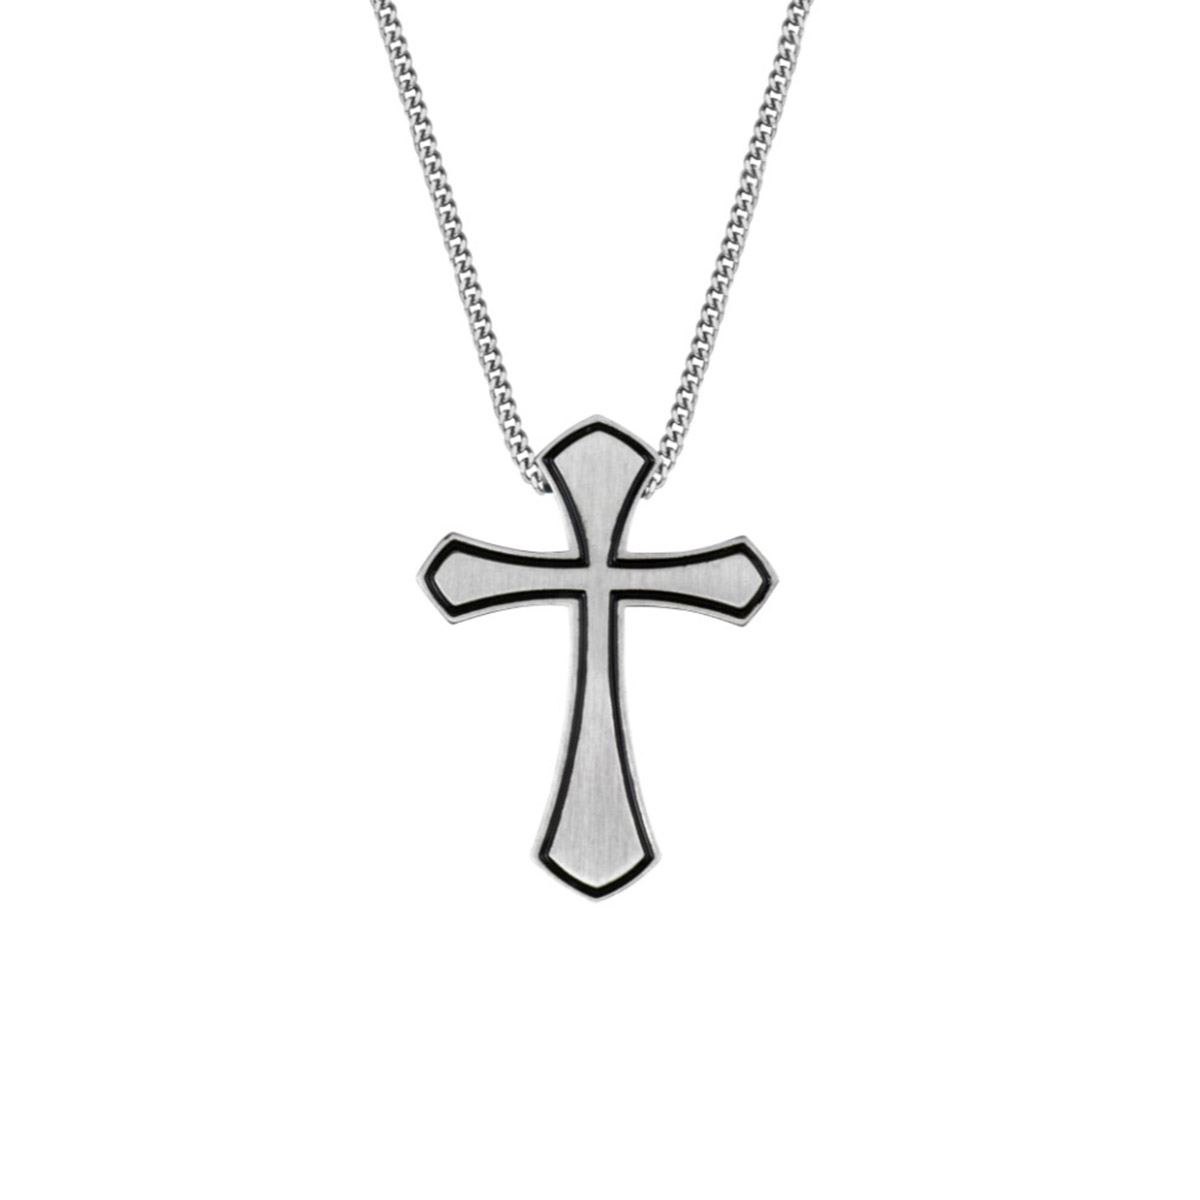 Stainless Steel Pinstripe Border Cross Pendant and Chain